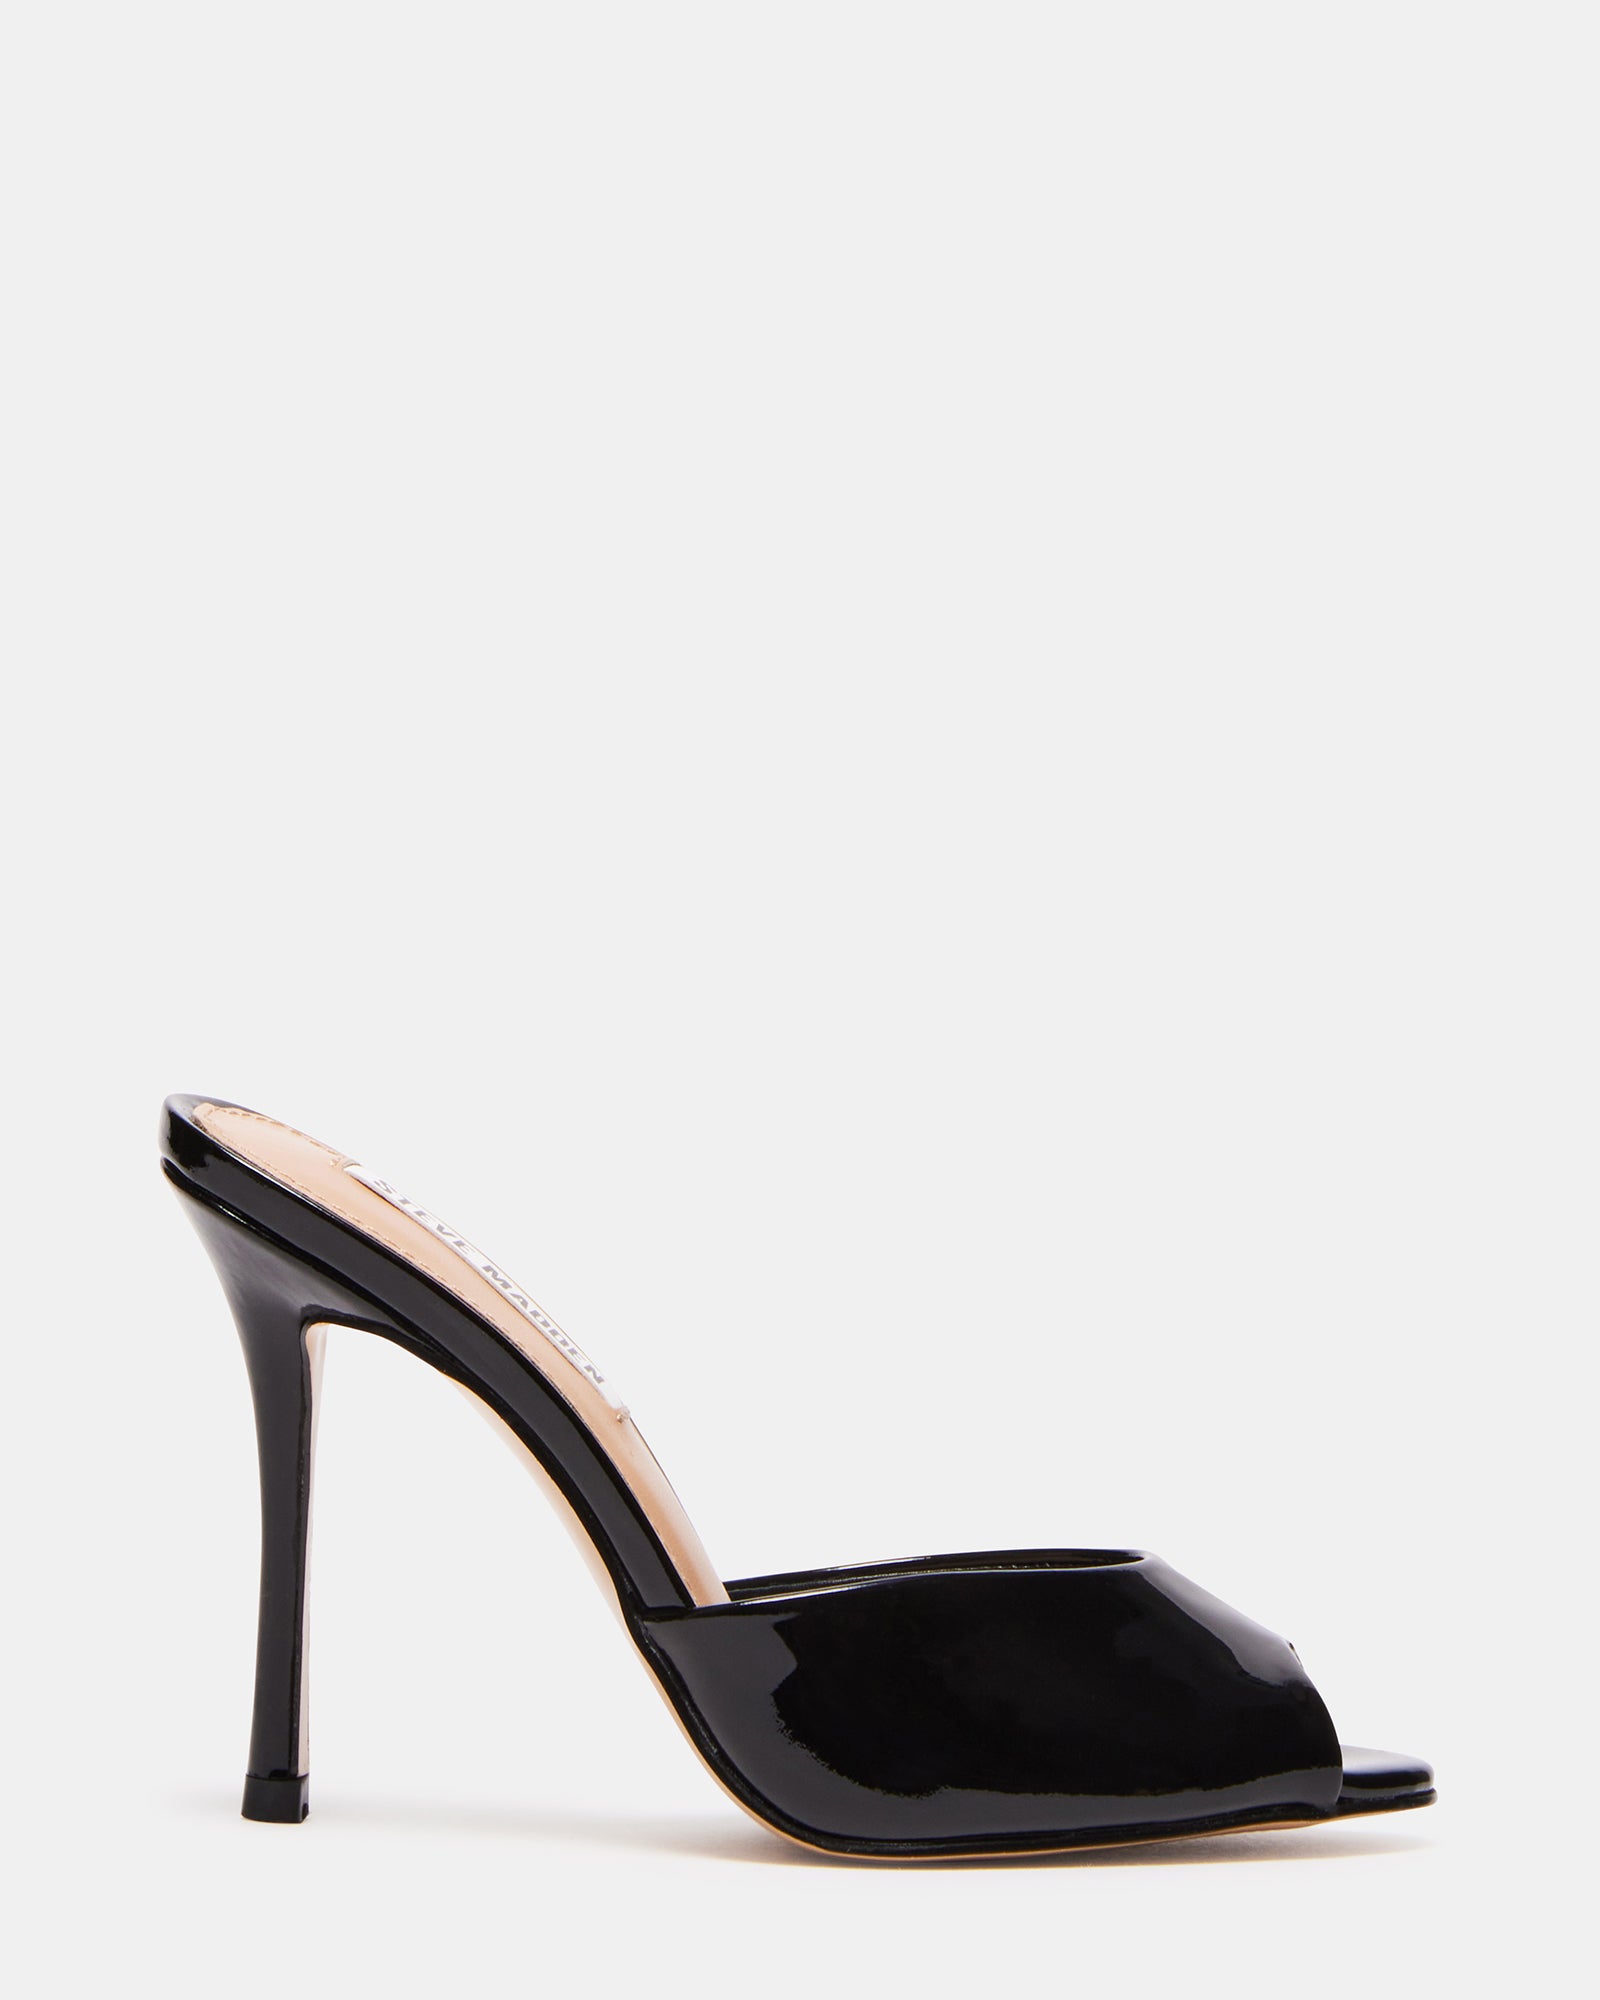 Maureen 100mm Black Satin Gold Leather Stiletto Mules | Malone Souliers